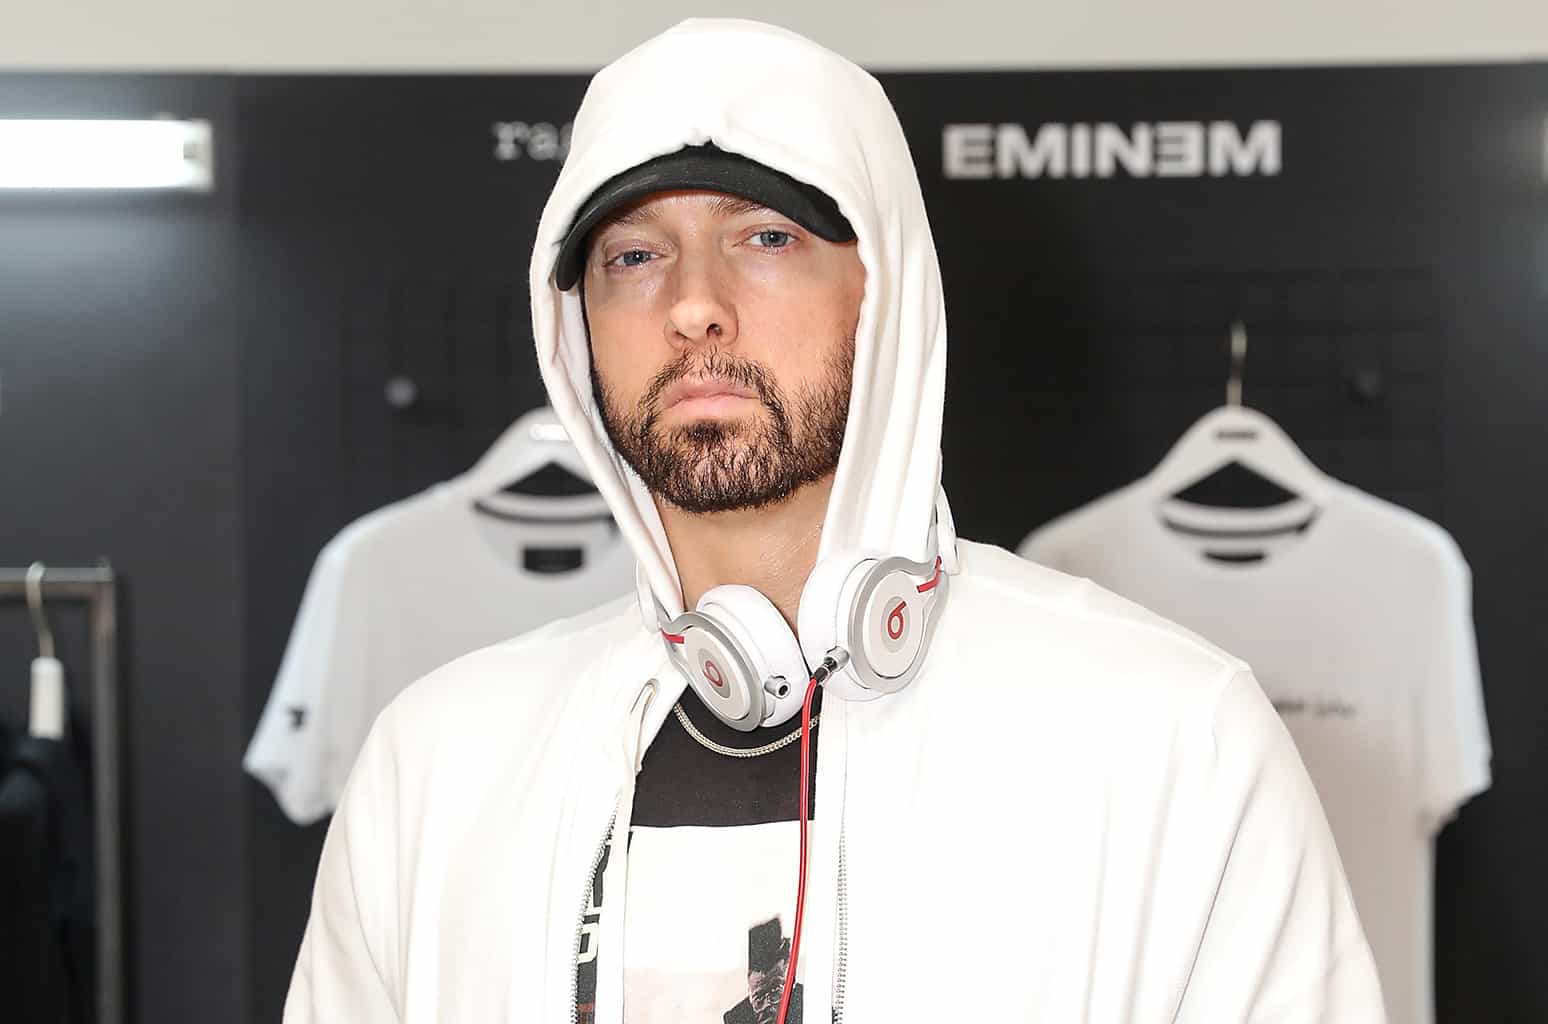 Eminem's 'Kamikaze' Debuted at Number 1 on Billboard 200, his 9th Consecutive #1 Album